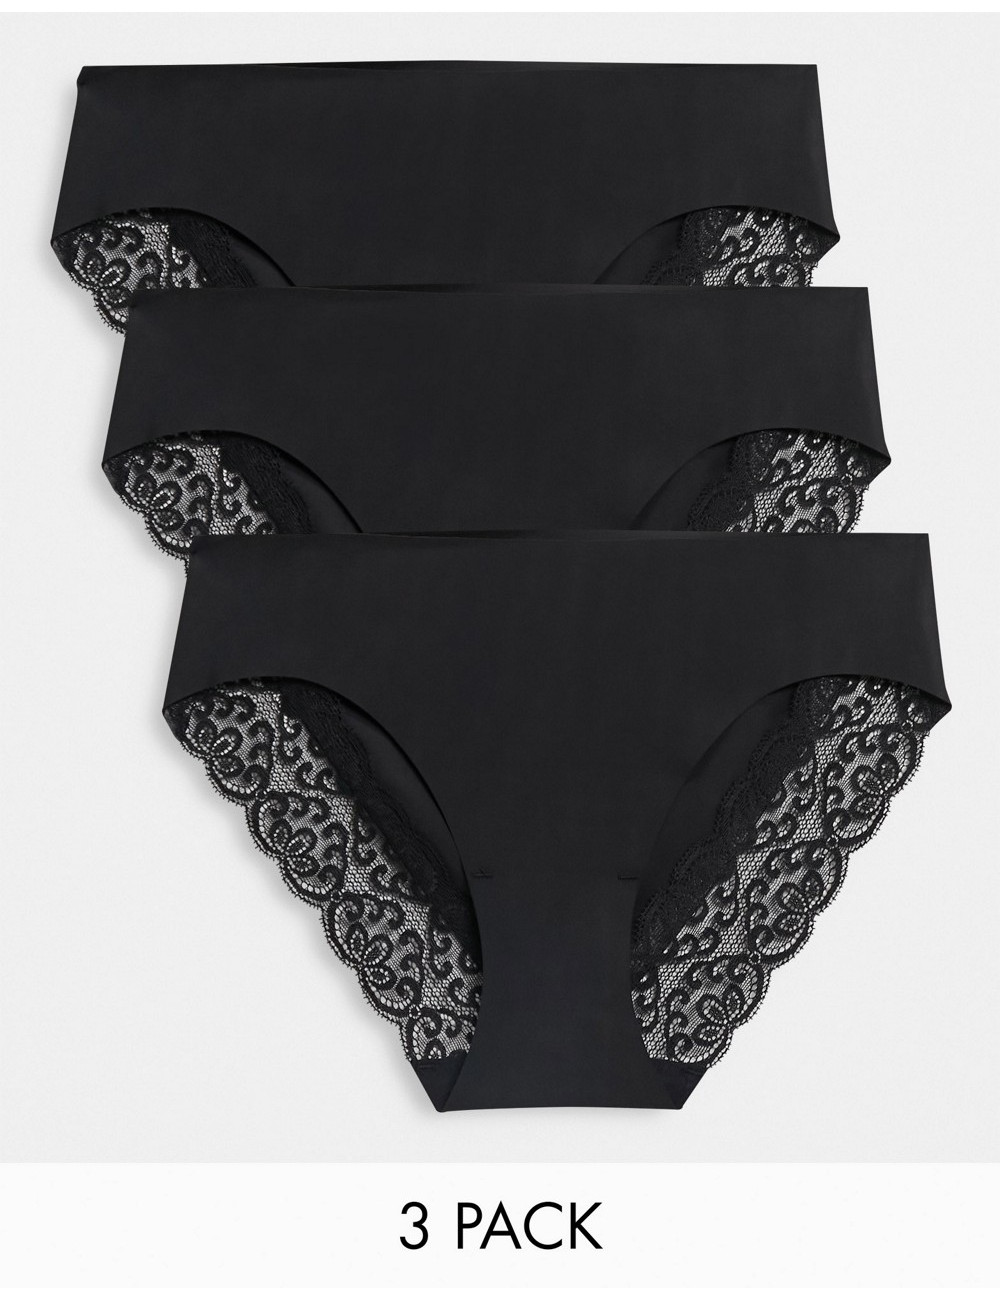 Cotton:On lace brief 3-pack...